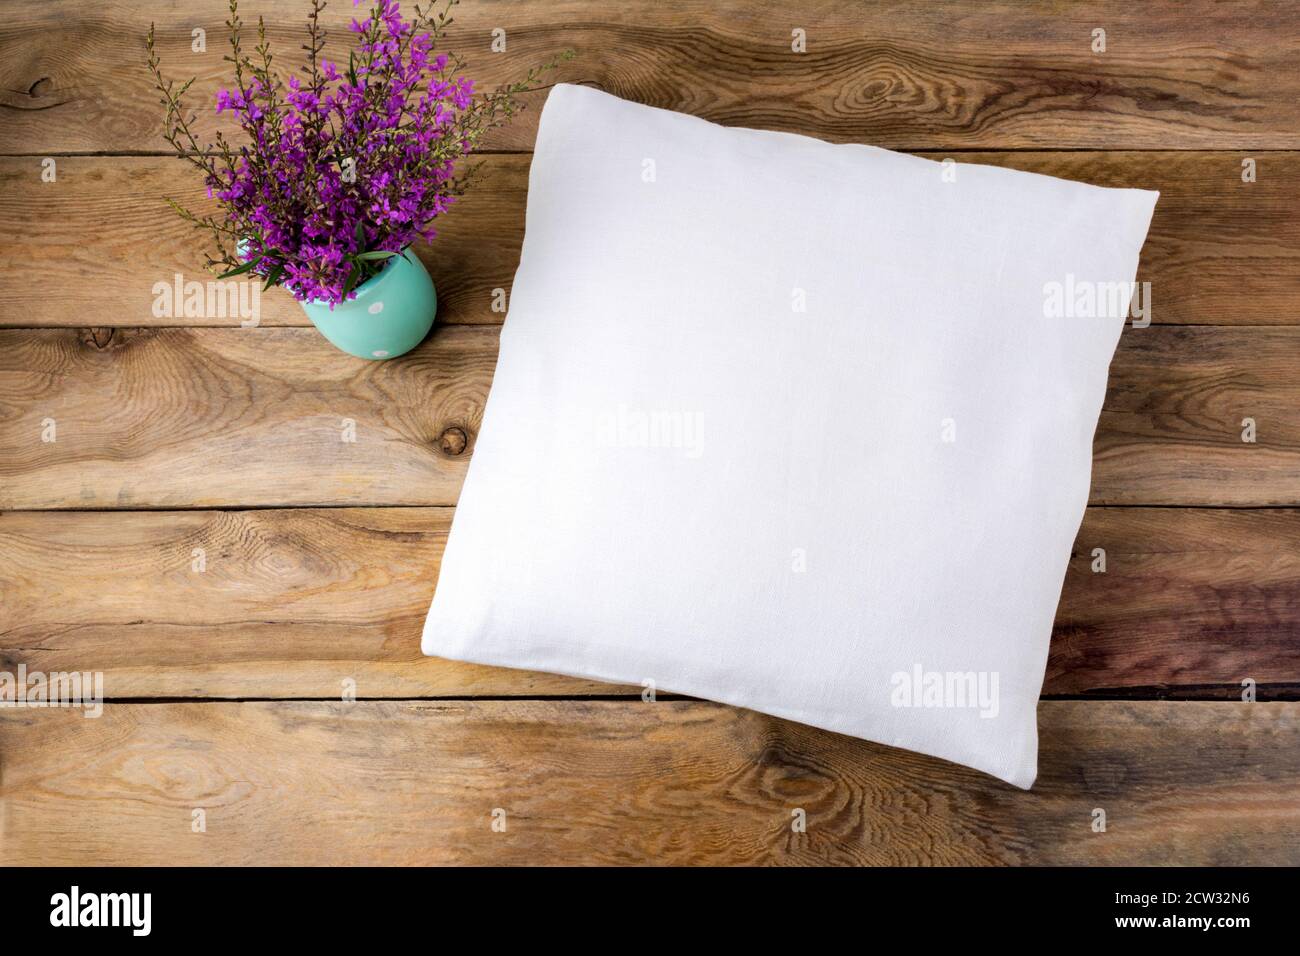 https://c8.alamy.com/comp/2CW32N6/square-cotton-pillow-mockup-with-purple-wildflowers-rustic-linen-pillowcase-mock-up-for-design-presentation-2CW32N6.jpg